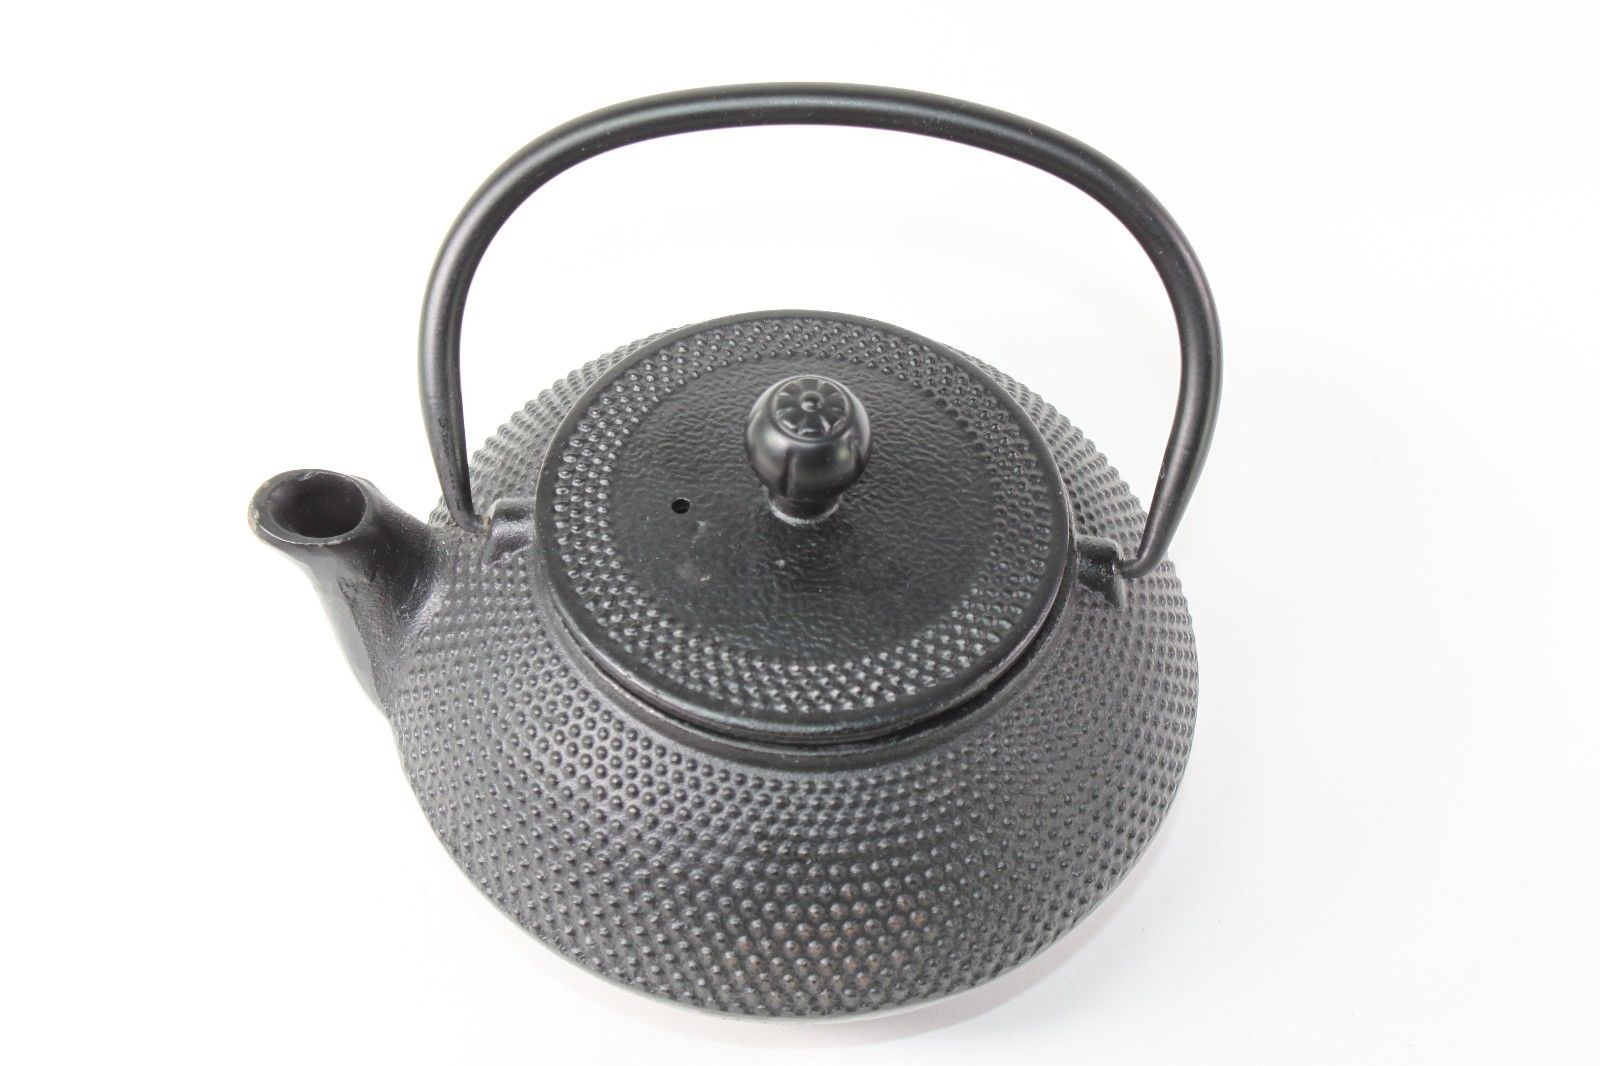 24 fl oz Black Small Dot Japanese Cast Iron Teapot Tetsubin with Infuser Filter - image 4 of 4